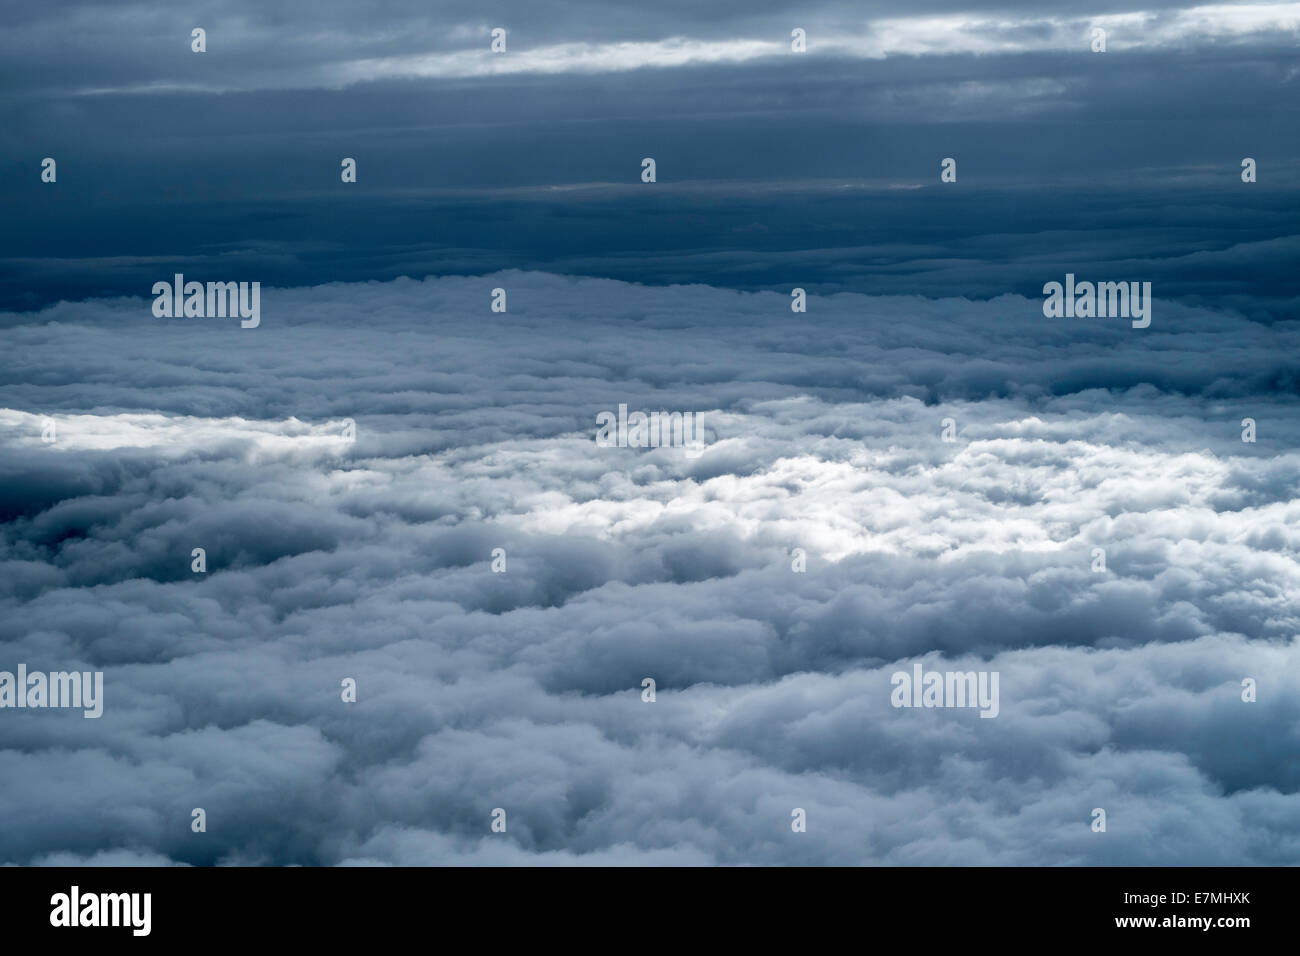 Clouds seen from airplane window seat Stock Photo